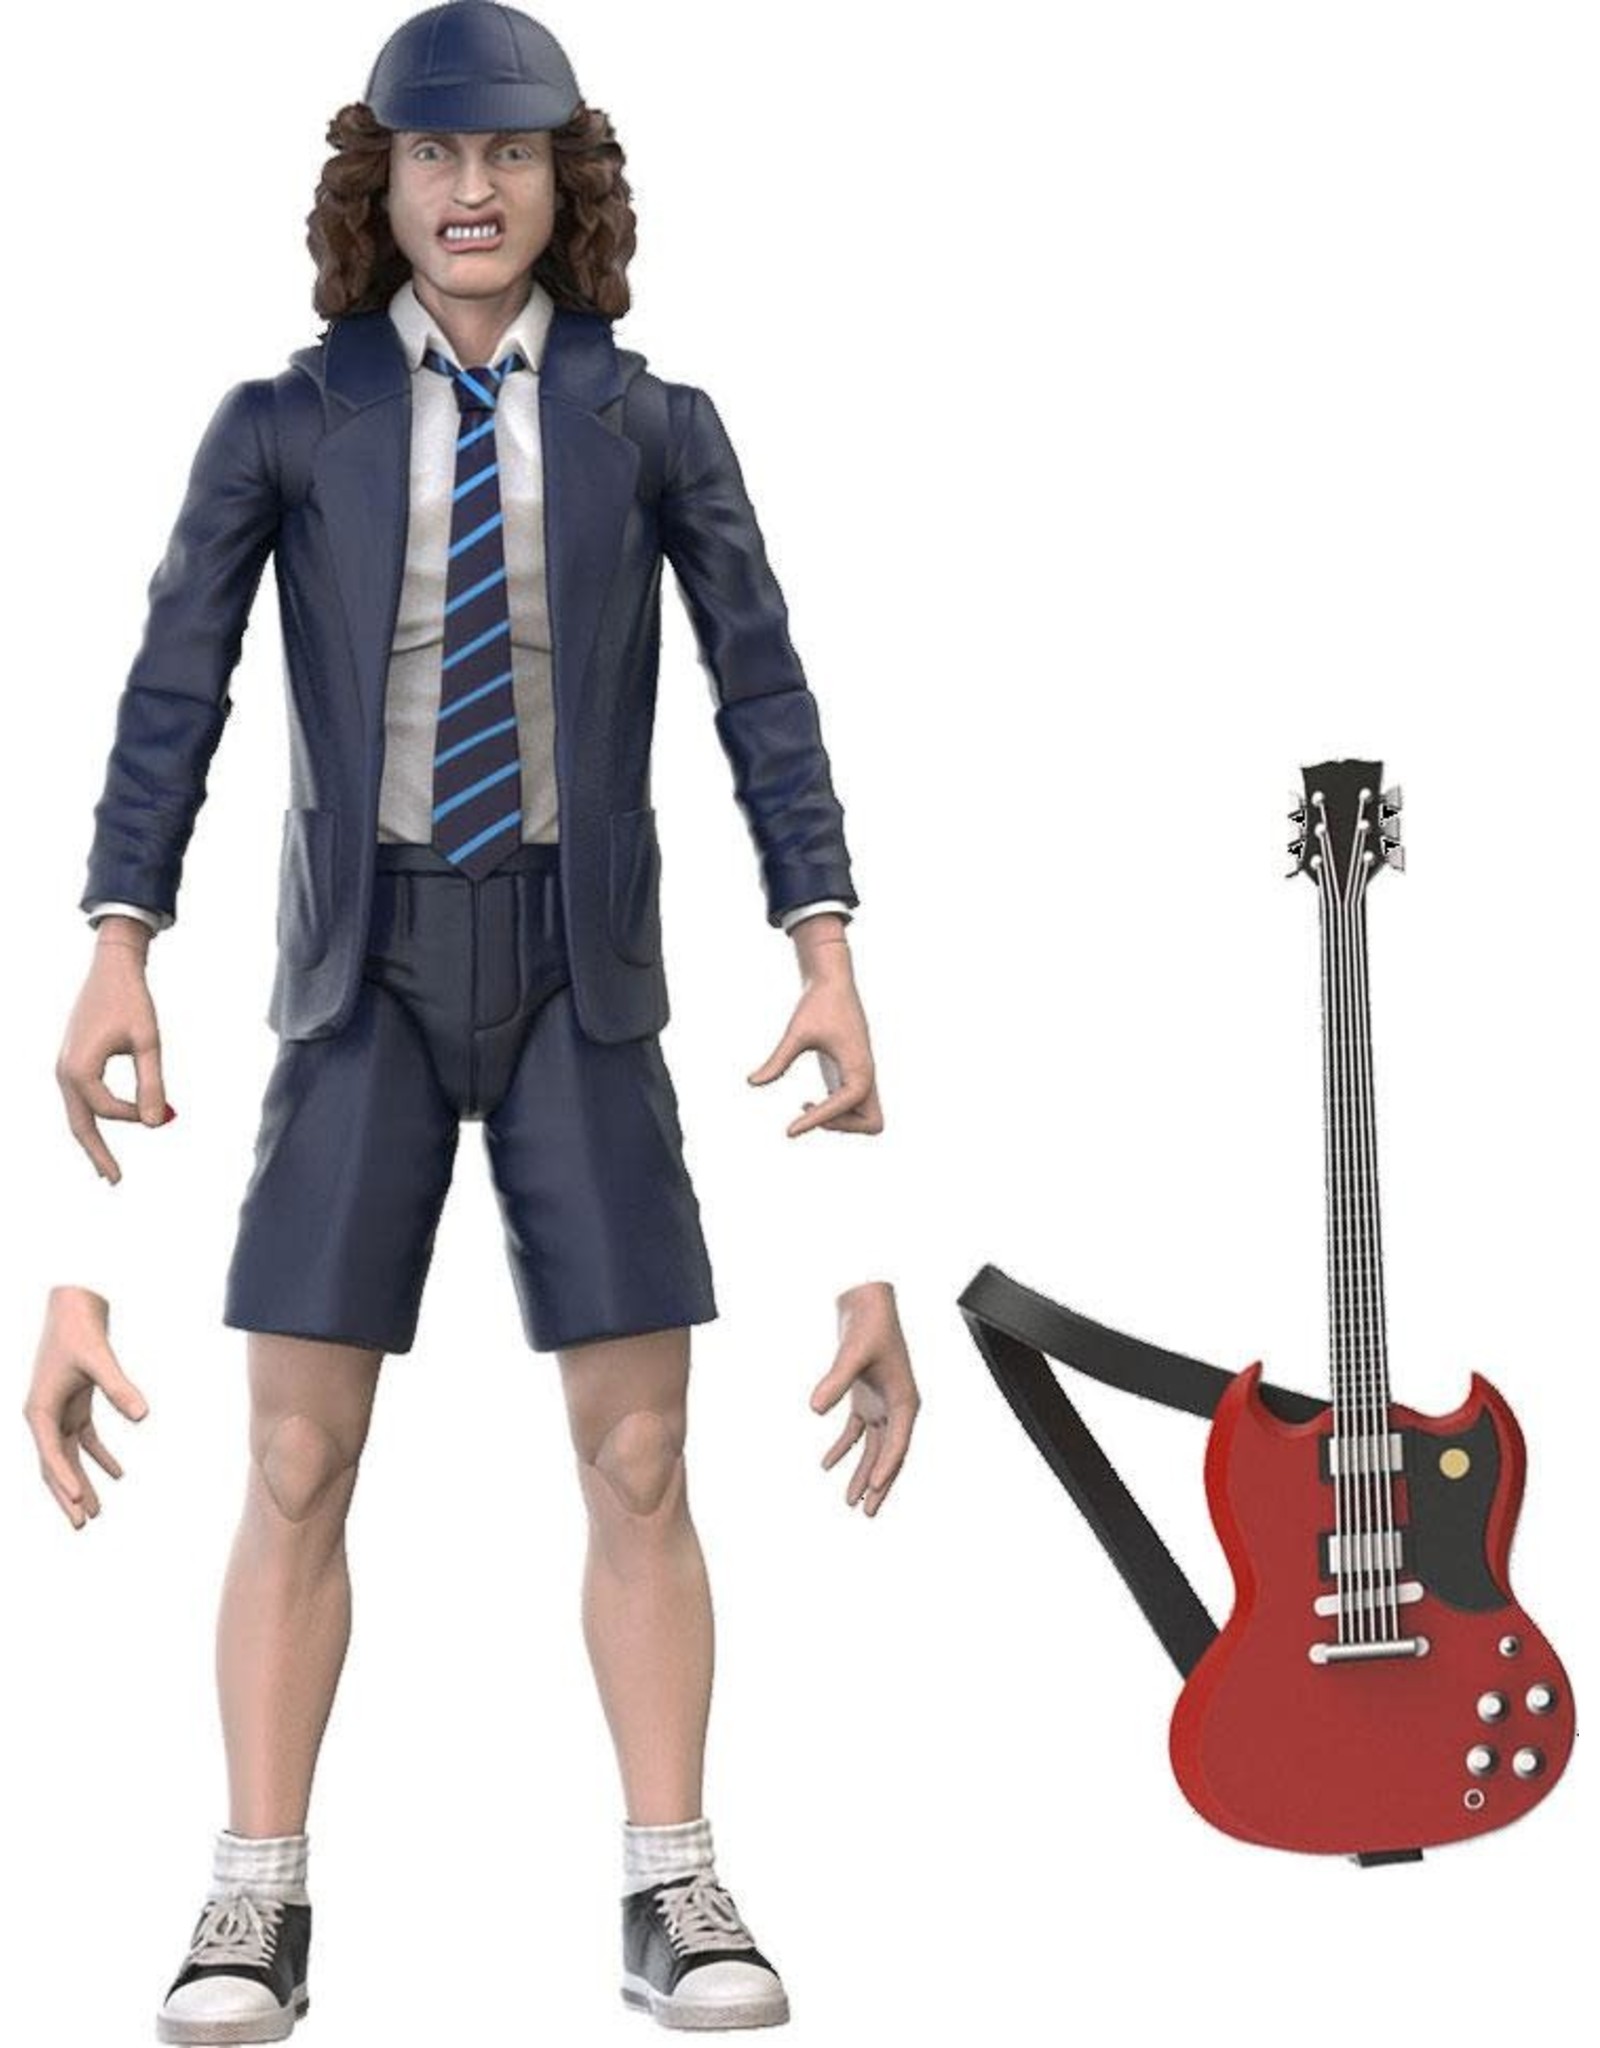 The Loyal Subjects AC/DC BST AXN Action Figure 13 cm - Angus Young